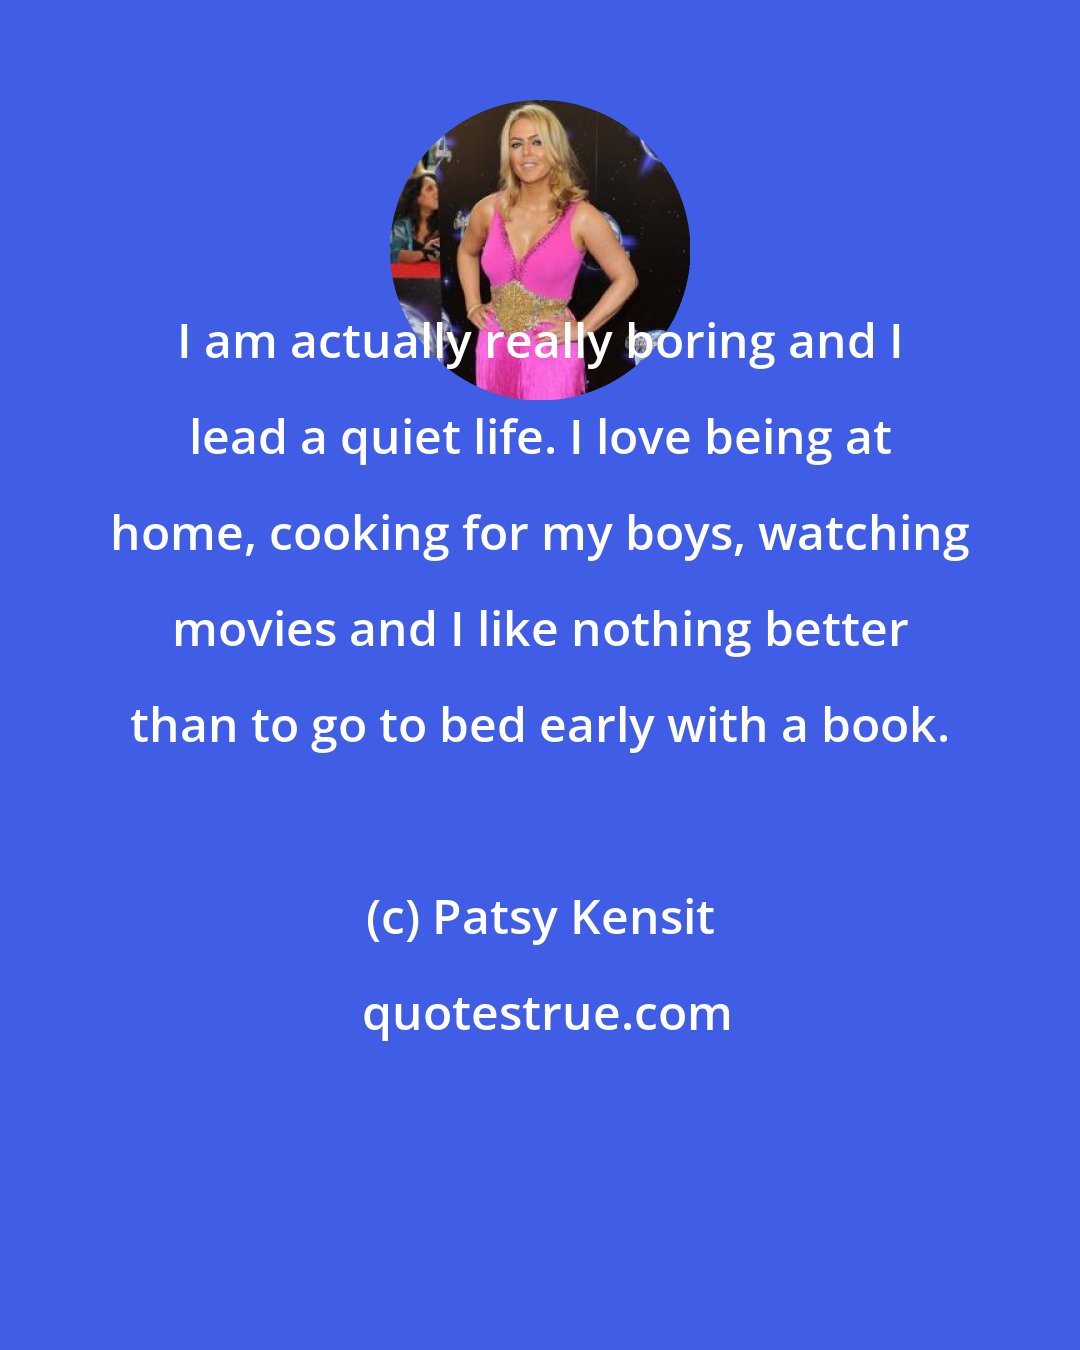 Patsy Kensit: I am actually really boring and I lead a quiet life. I love being at home, cooking for my boys, watching movies and I like nothing better than to go to bed early with a book.